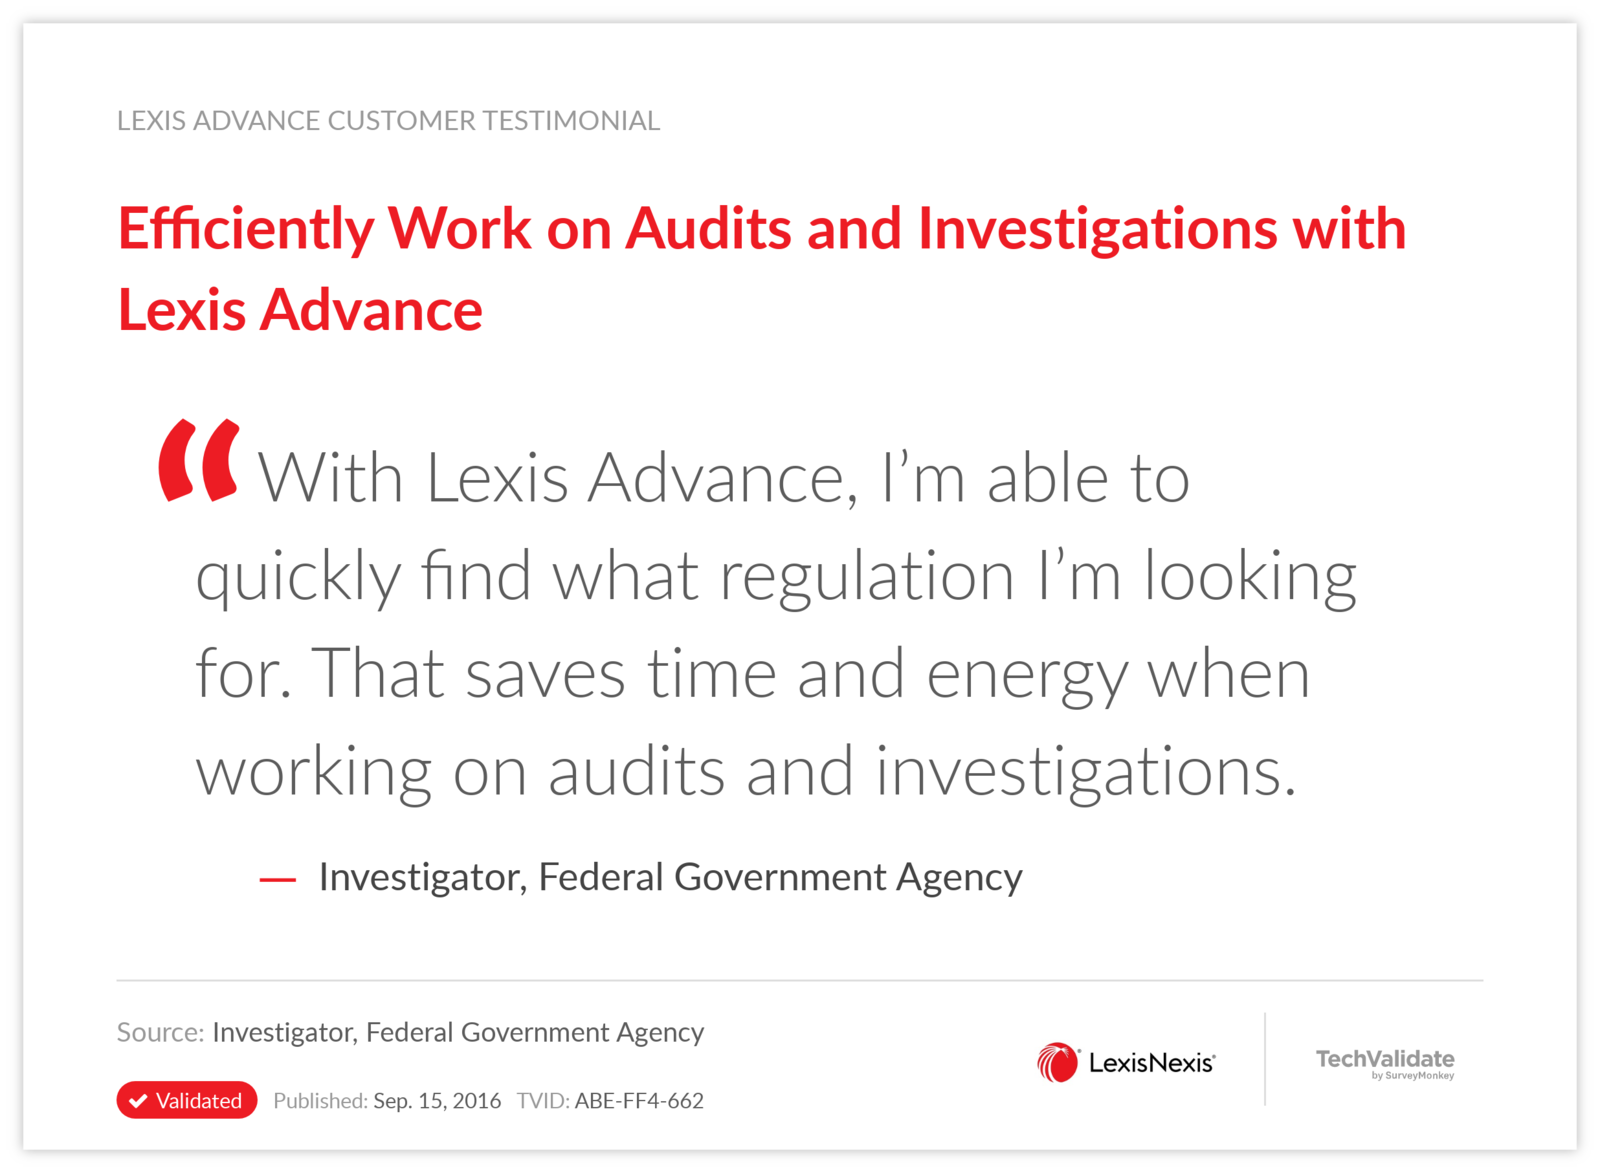 Efficiently Work on Audits and Investigations with Lexis Advance